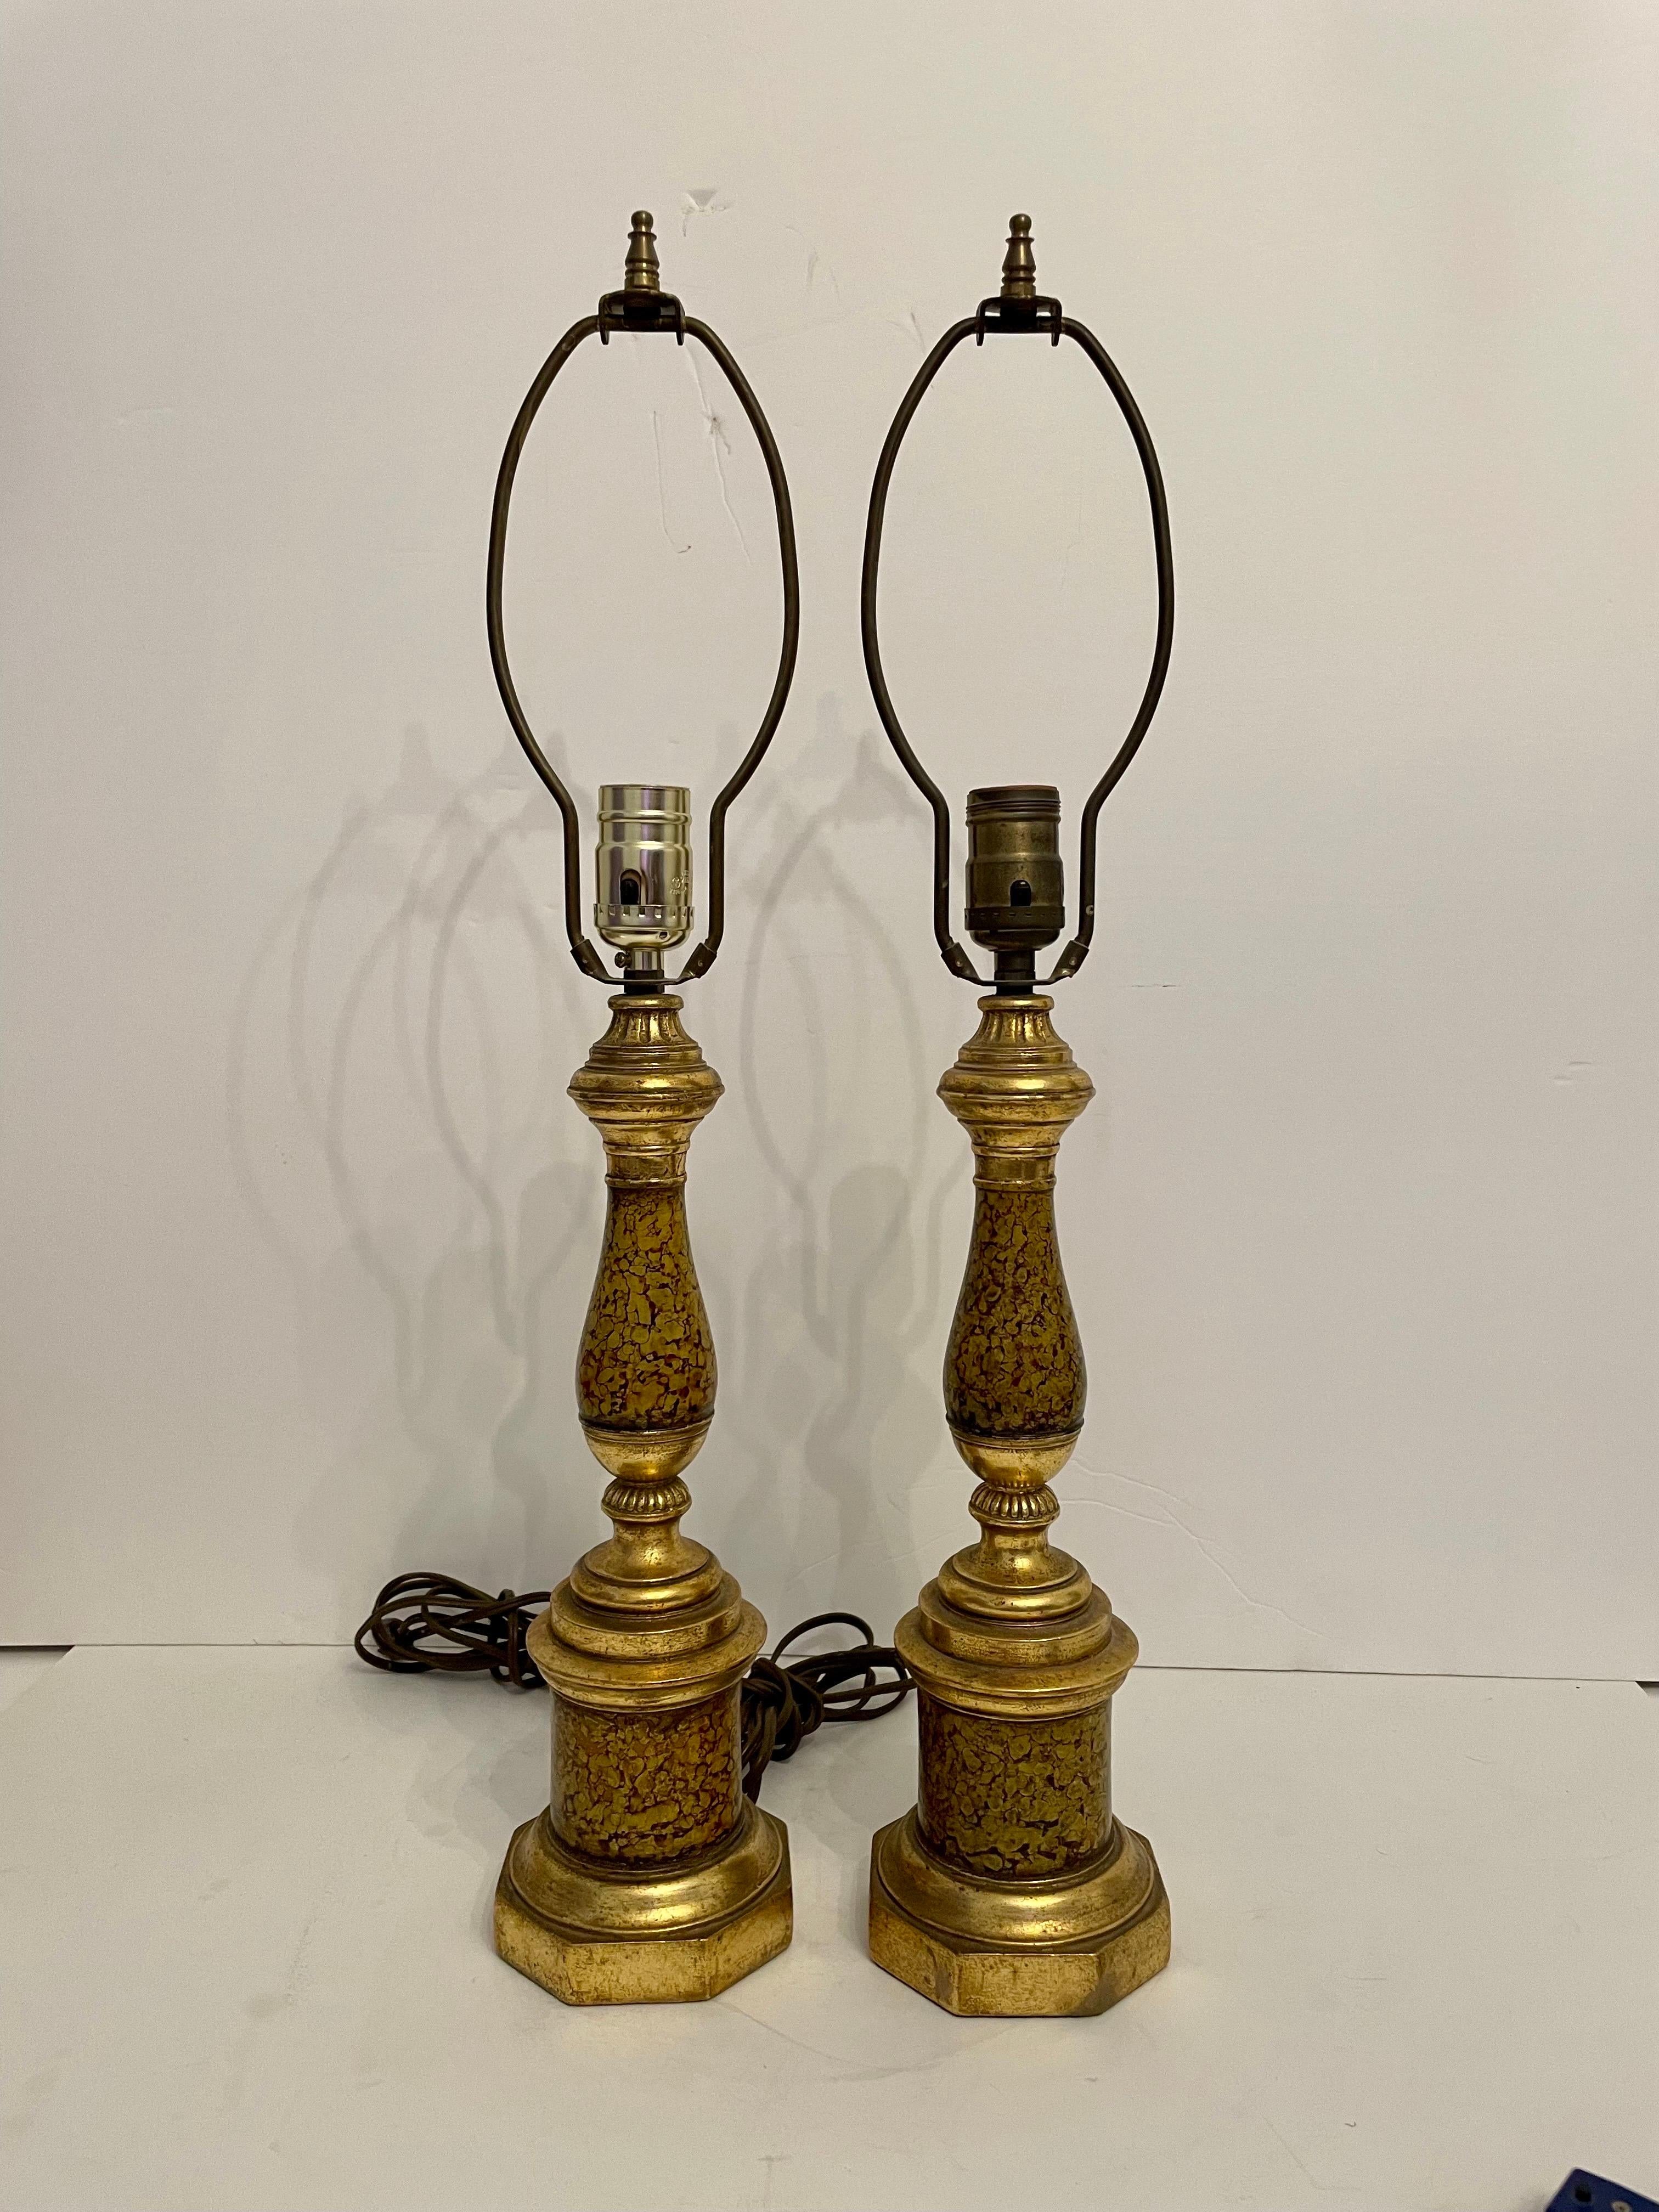 Pair Of Painted and Gilt Borghese Table Lamps. In original untouched condition with original gilt stripe shades included. Borghese sticker on bottoms. Very good quality. 24